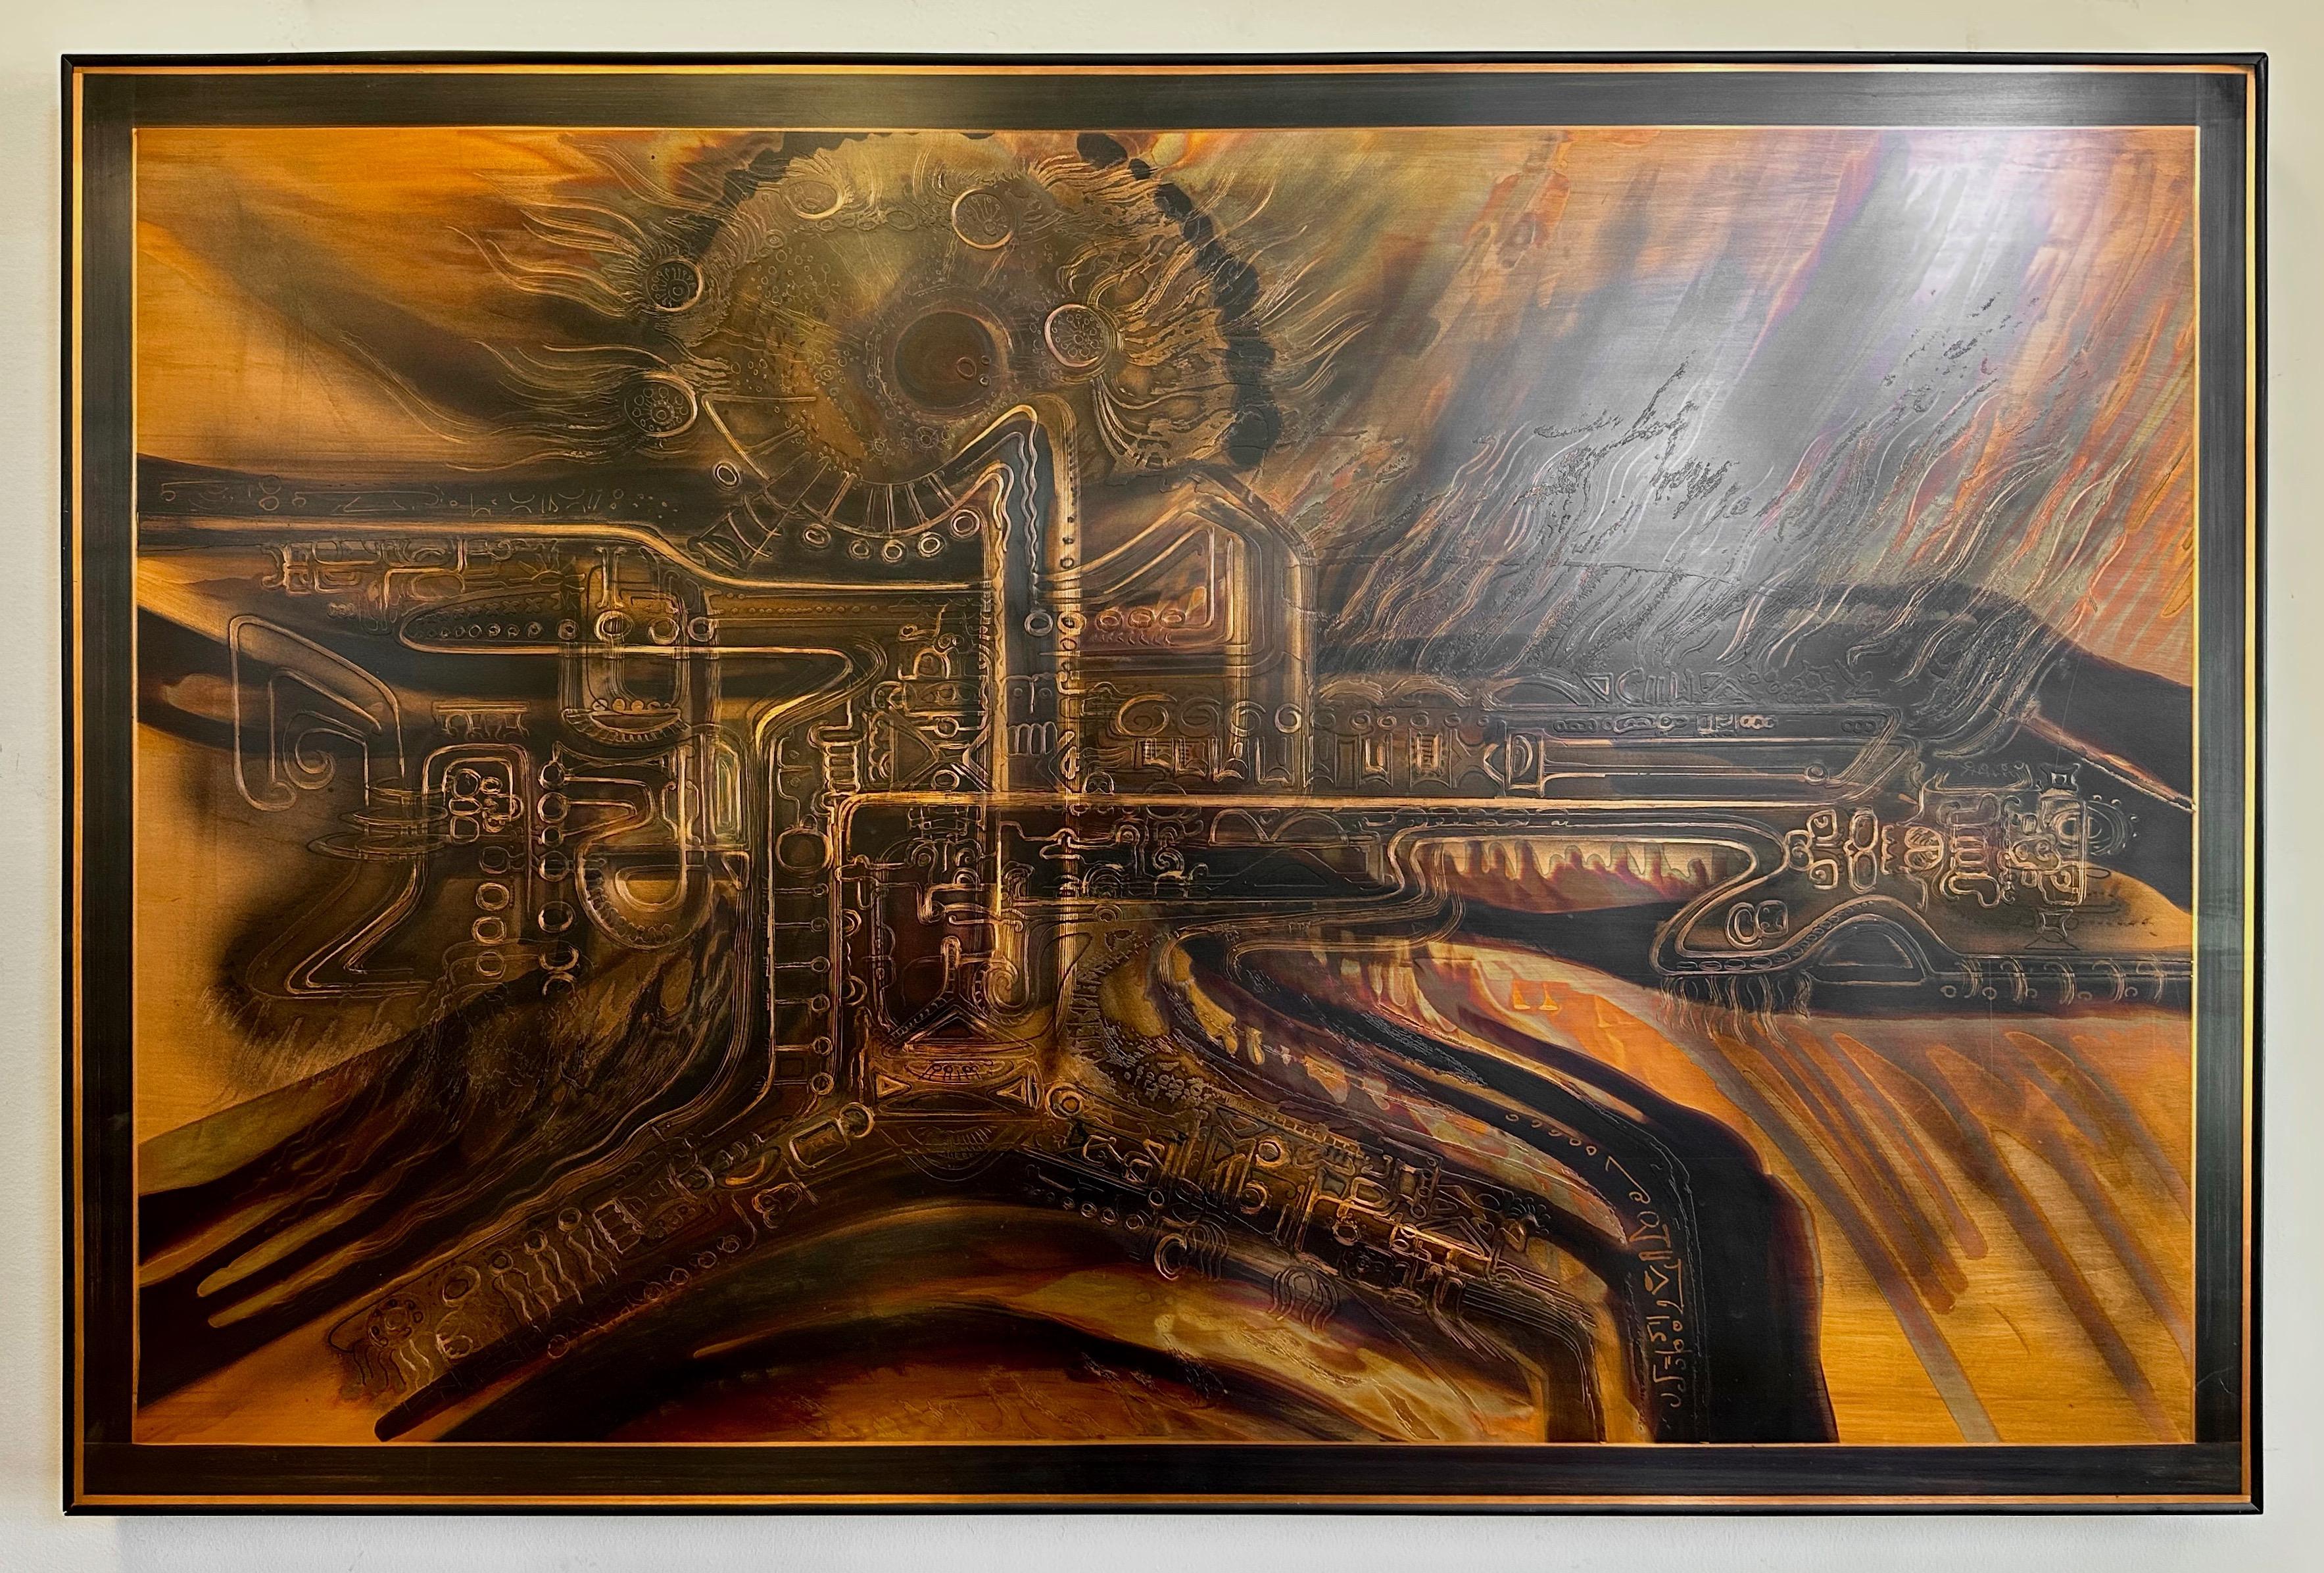 A large and impactful Brutalist etched copper work of wall art by Bernhard Rohne for Metallic Design Studio, signed, numbered, and dated.

German-born, Vancouver-based artist and designer Rohne possesses a singular adroitness at combining artistic